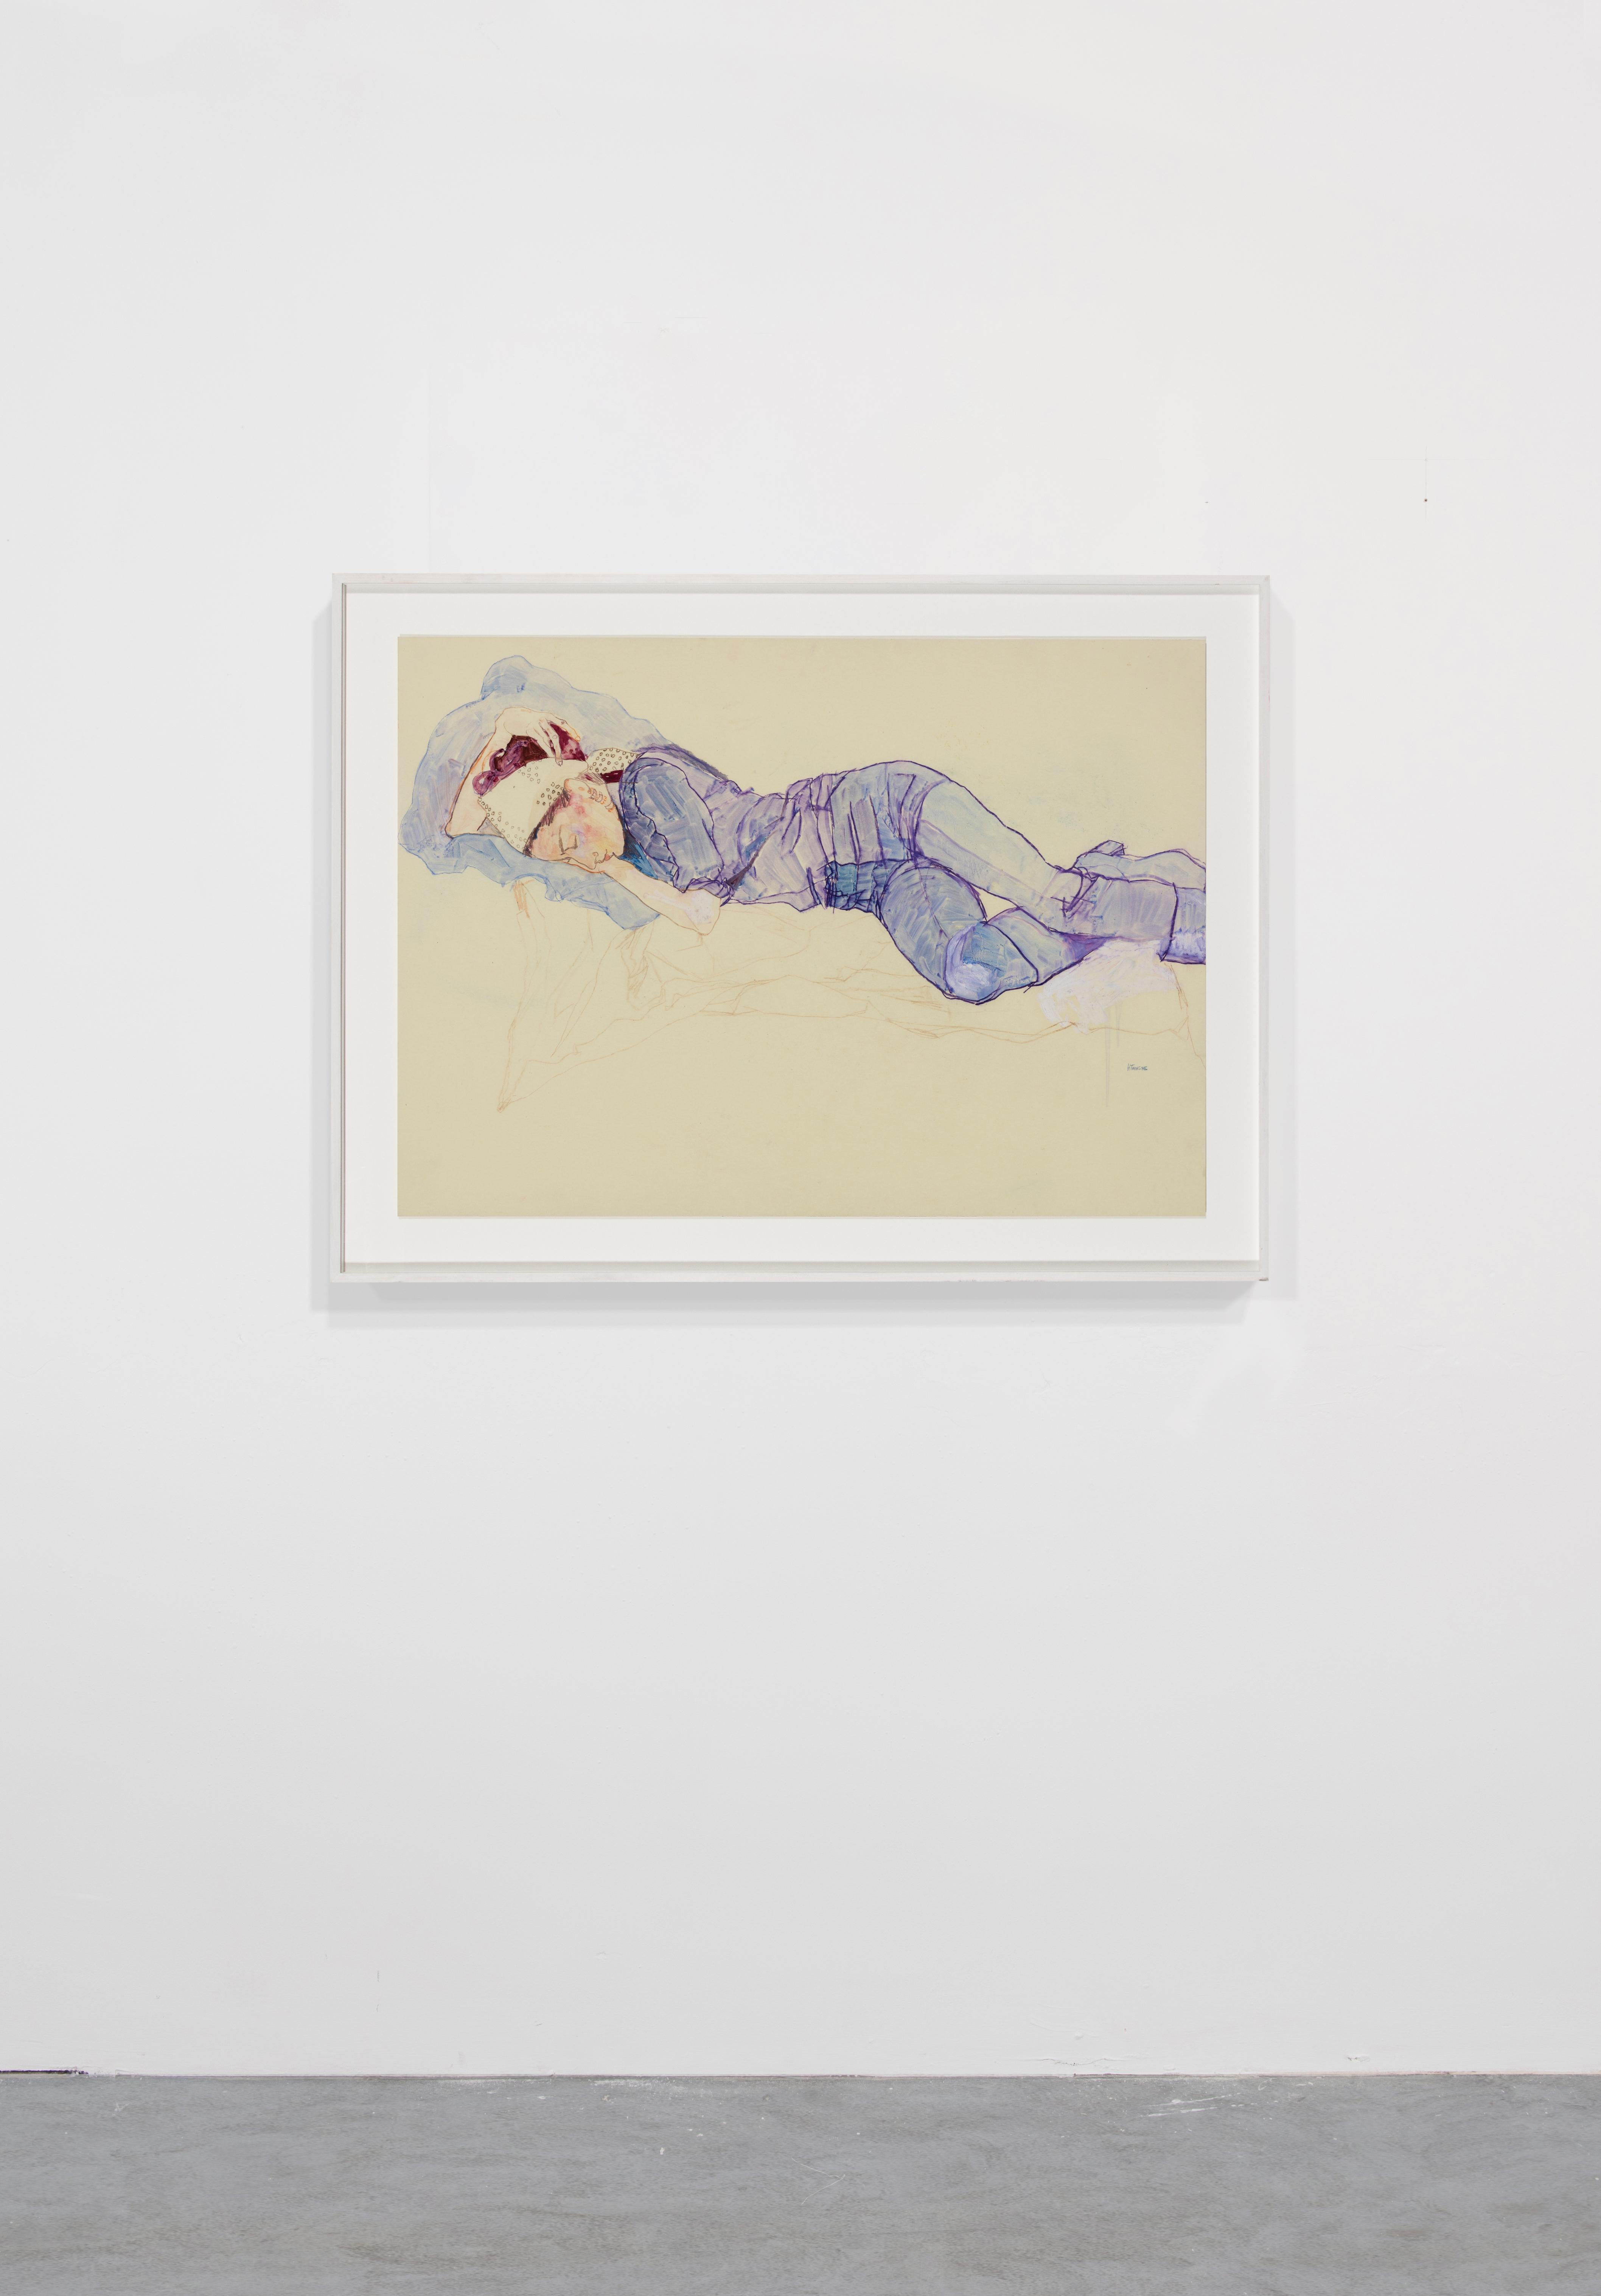 Josephine S. (Lying Down - Blues), Mixed media on Pergamenata parchment - Contemporary Art by Howard Tangye